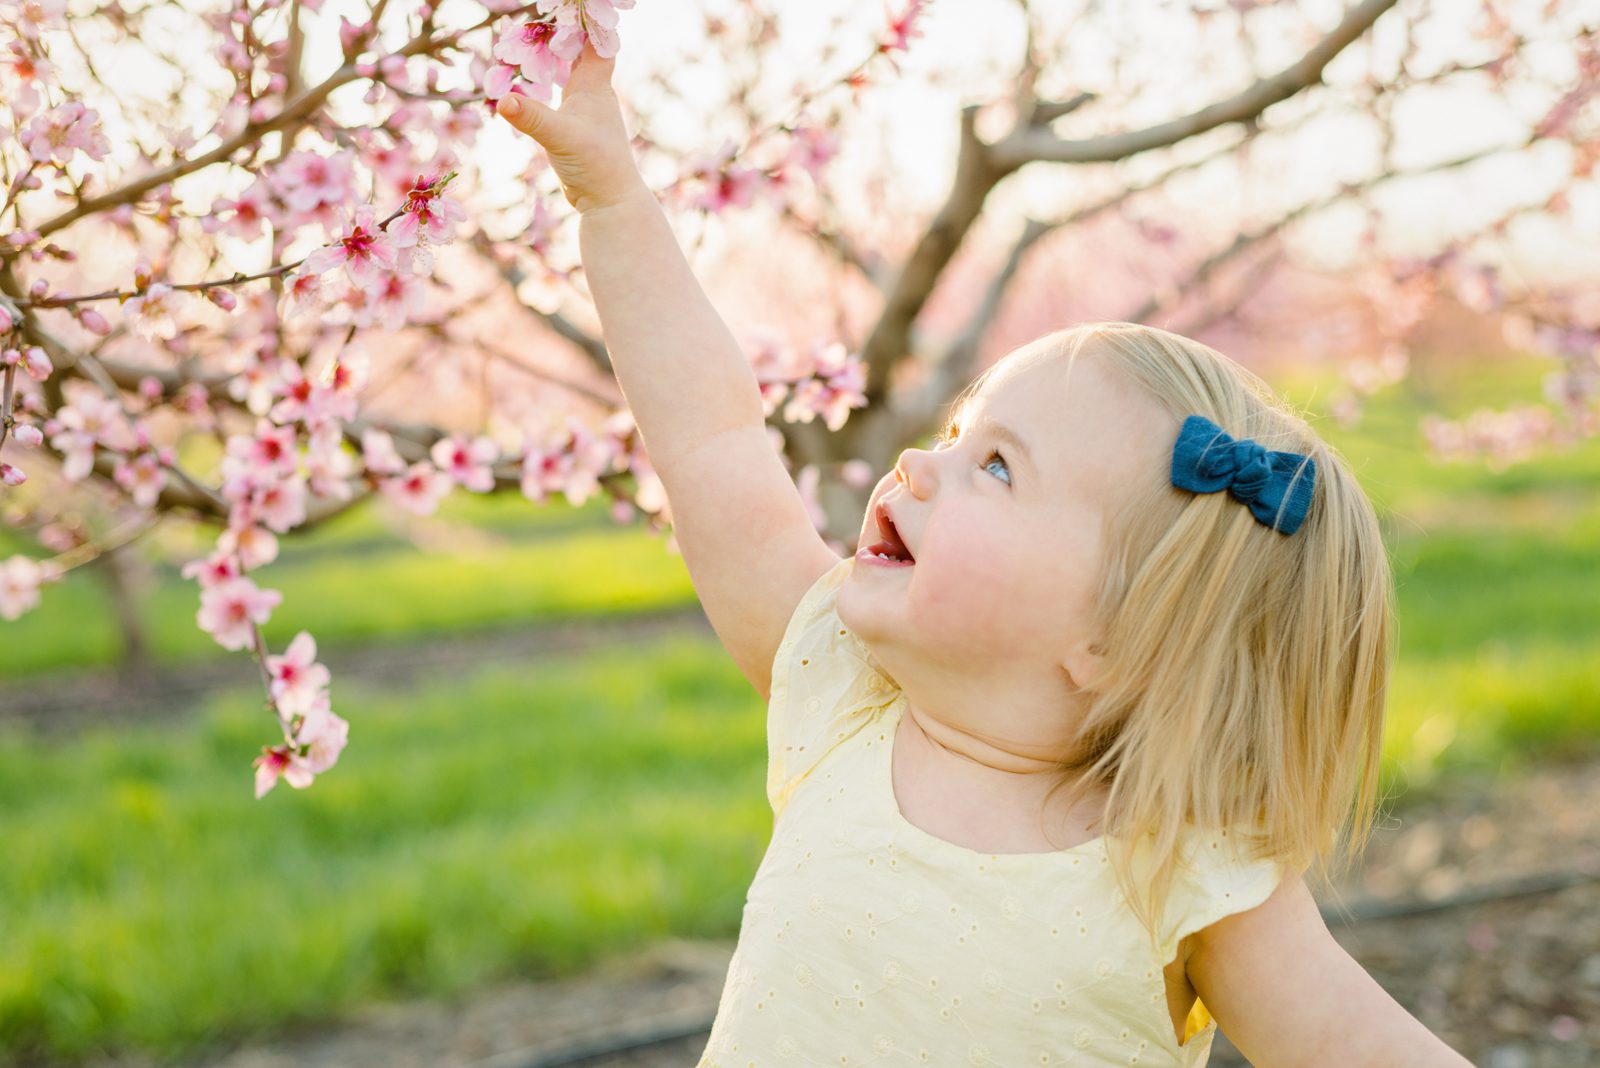 a young girl smiling as she reaches up to touch a pink peach blossom on a tree during a spring photo session